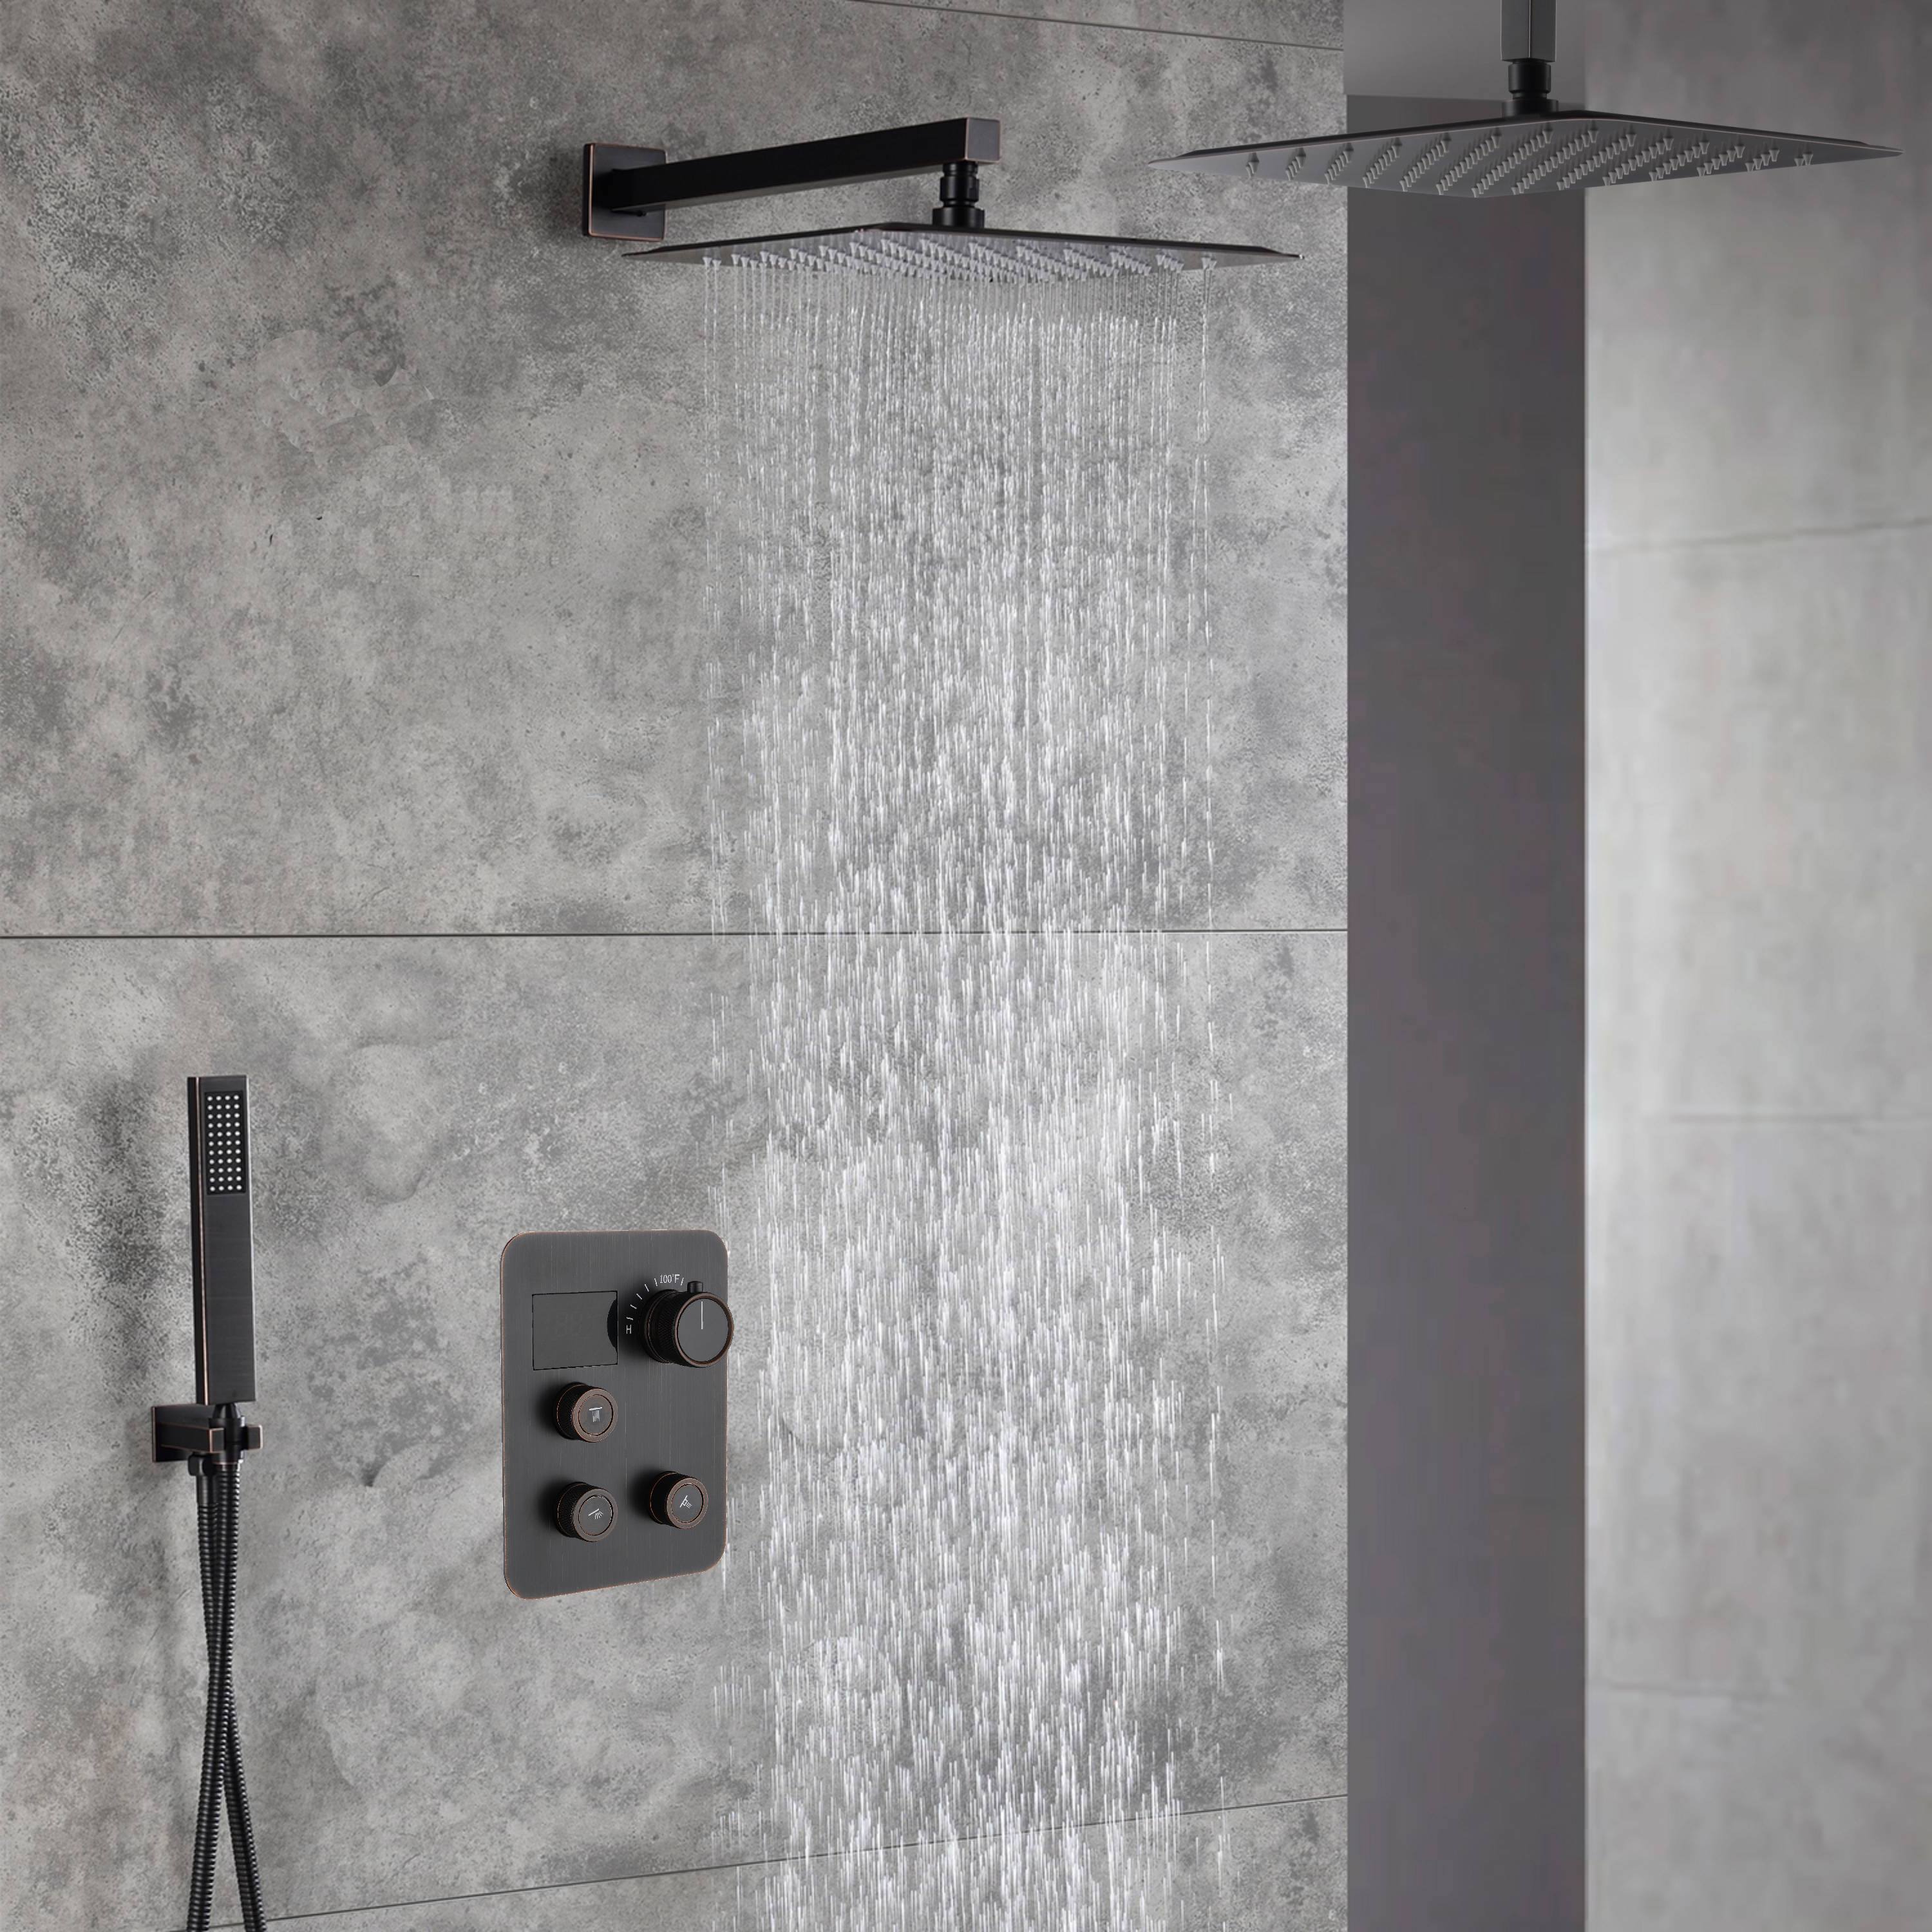 12-Inch Non-LED Light Ceiling Mounted Oil Rubbed Bronze 3-Way Thermostatic Shower Faucet System with Wall Mount 12-Inch Rainfall Shower Head